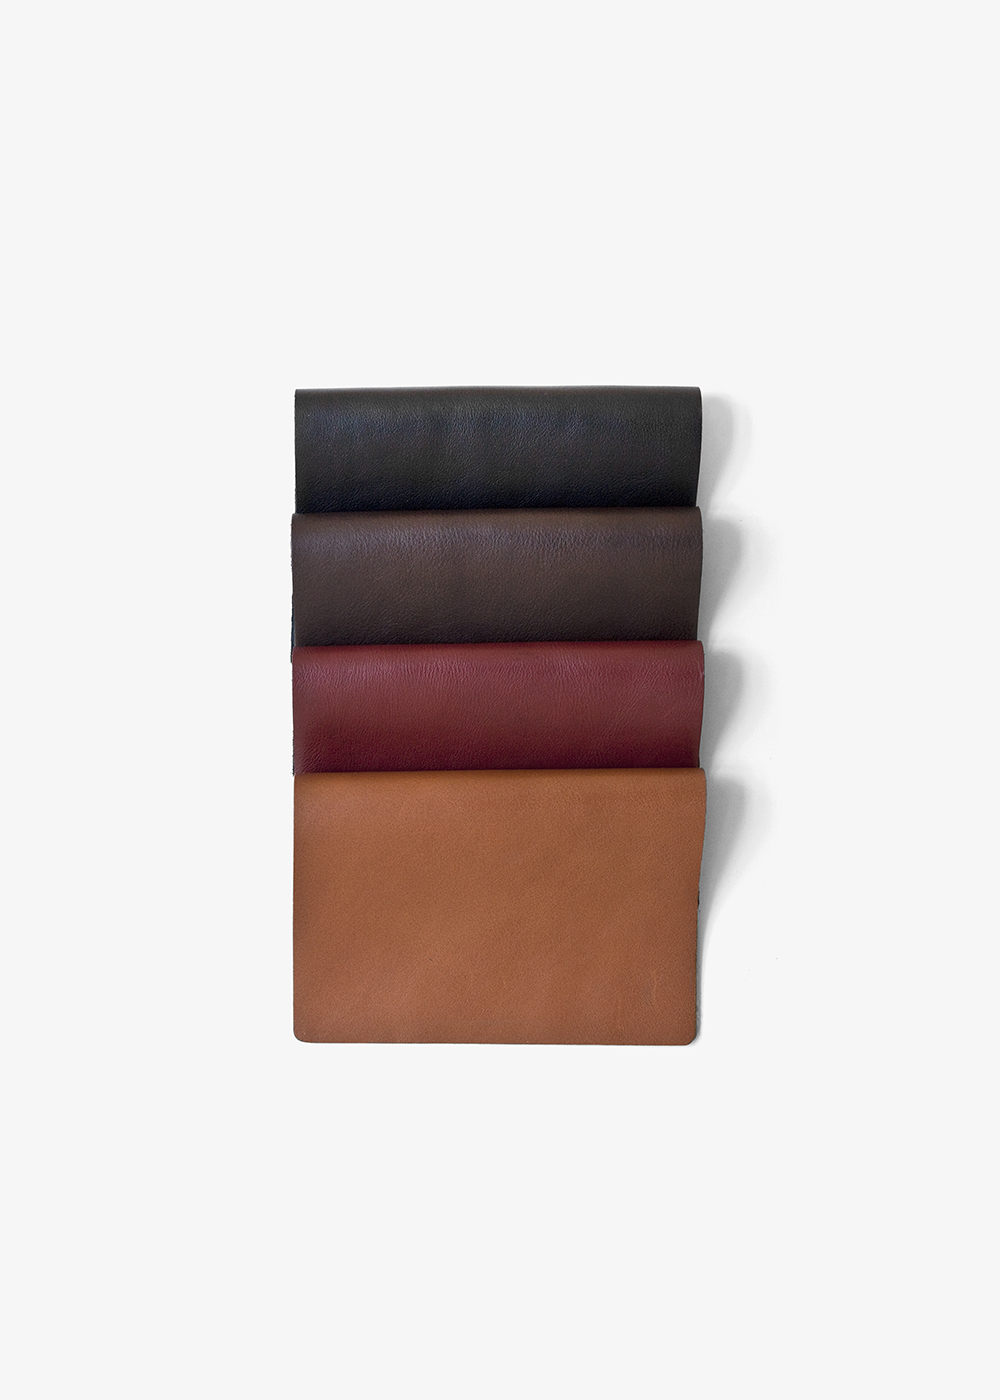 Collections | Sorensen Leather